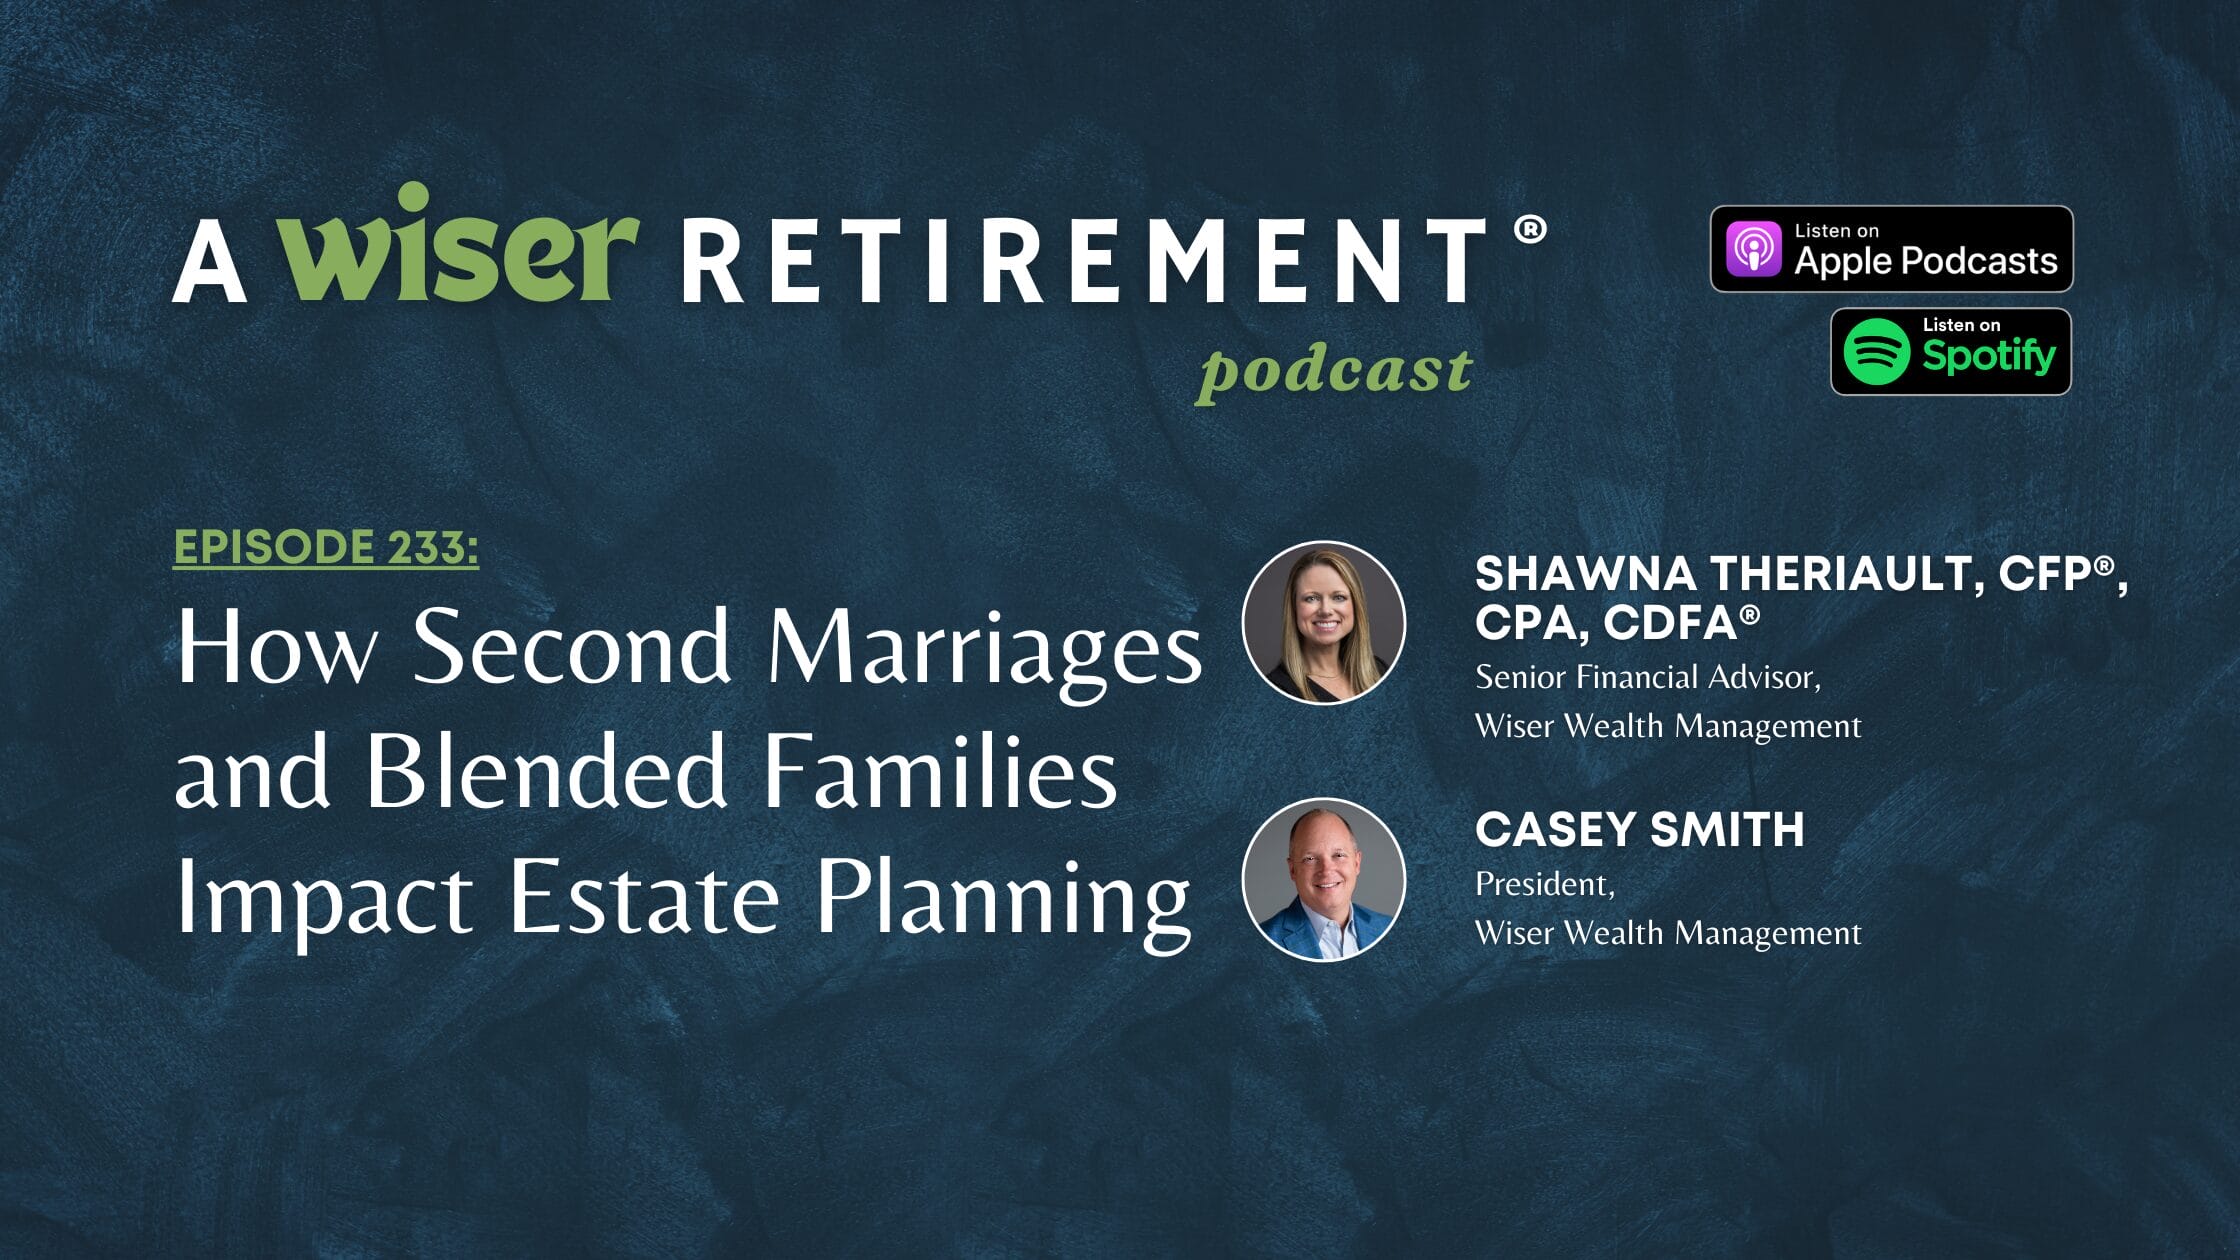 How Second Marriages and Blended Families Impact Estate Planning